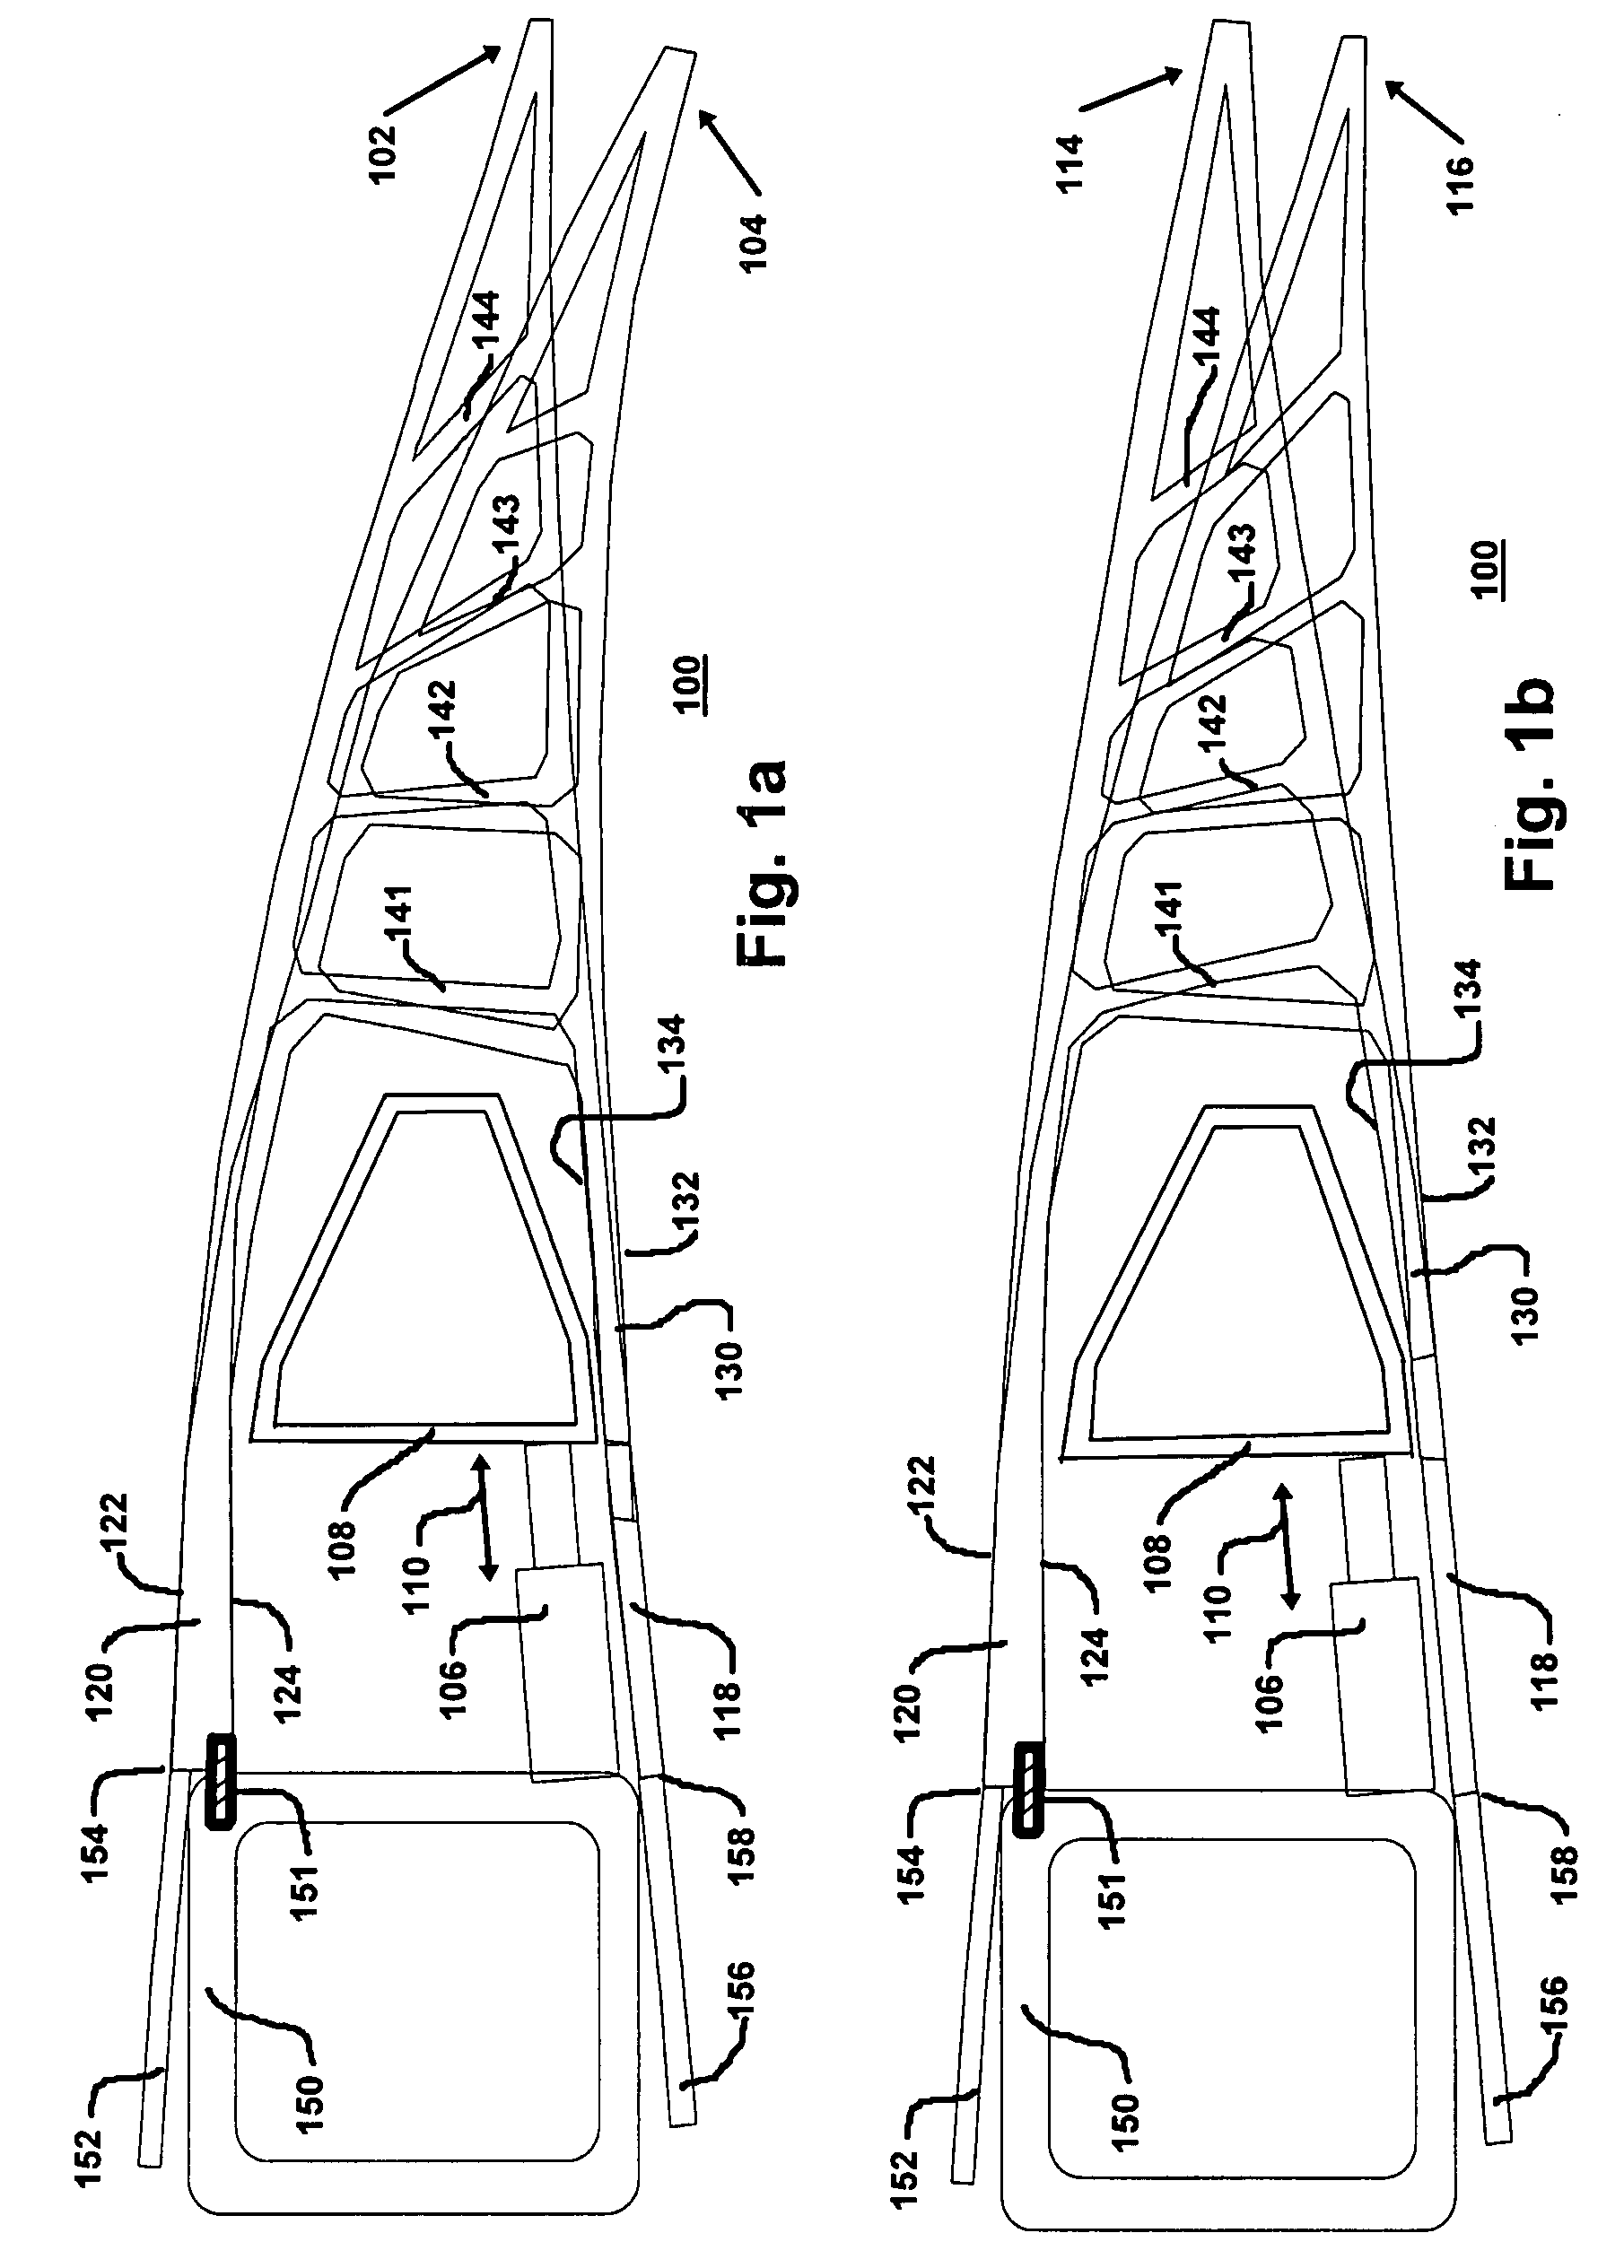 Adaptive compliant wing and rotor system